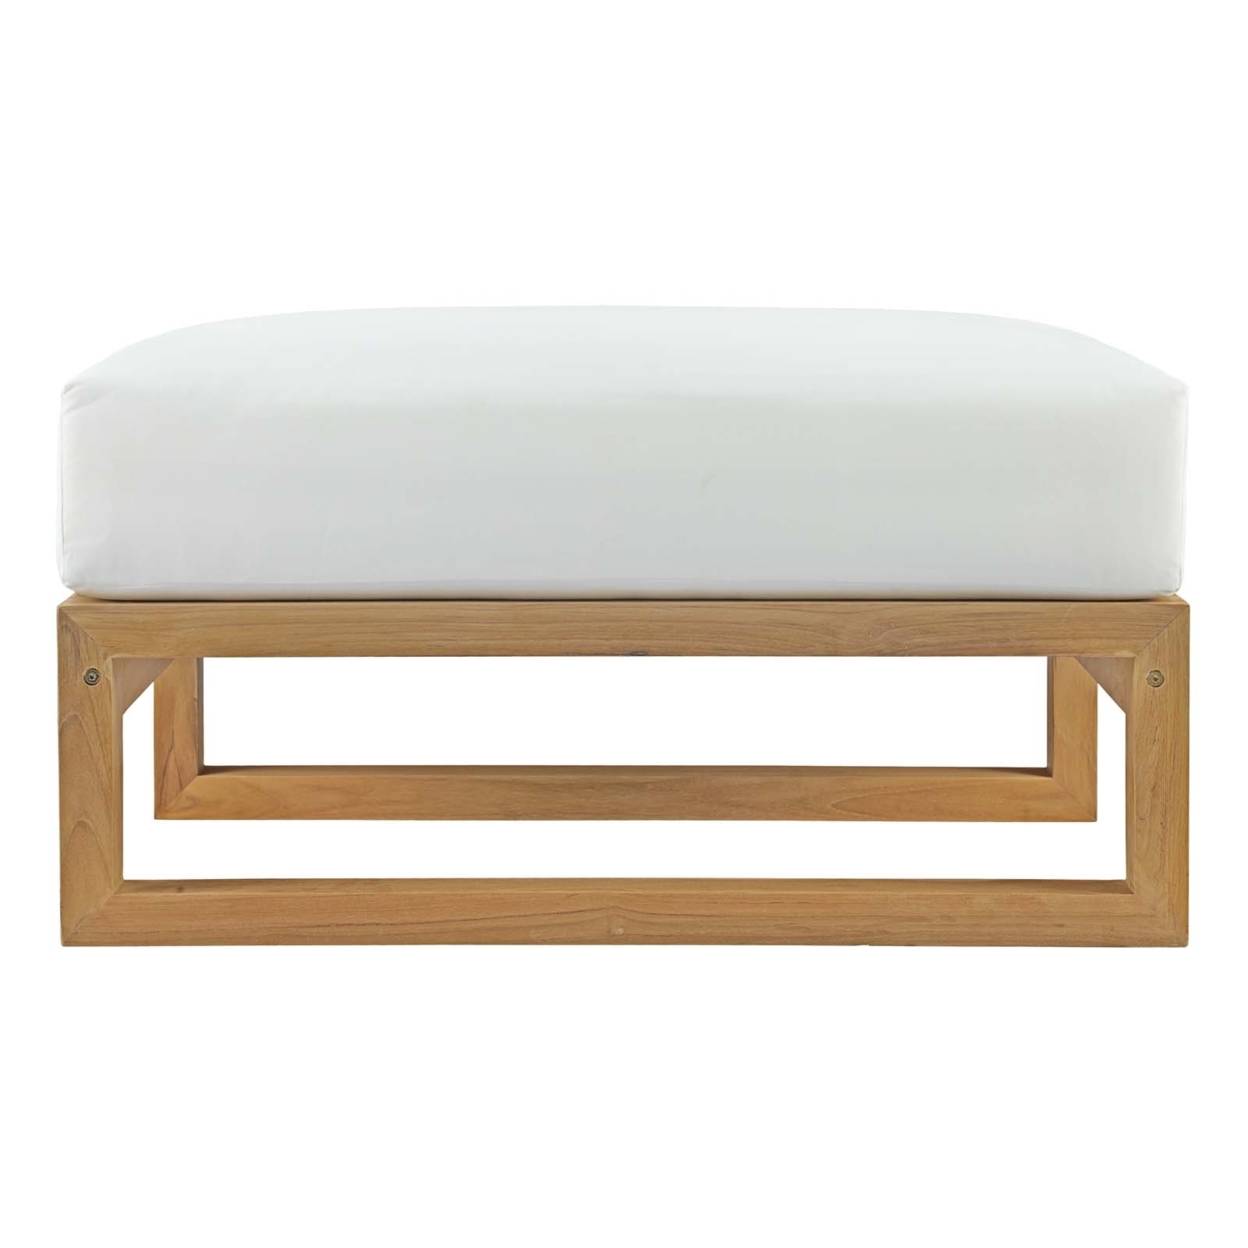 Modway Upland Outdoor Patio Teak Ottoman in Natural White - image 3 of 4